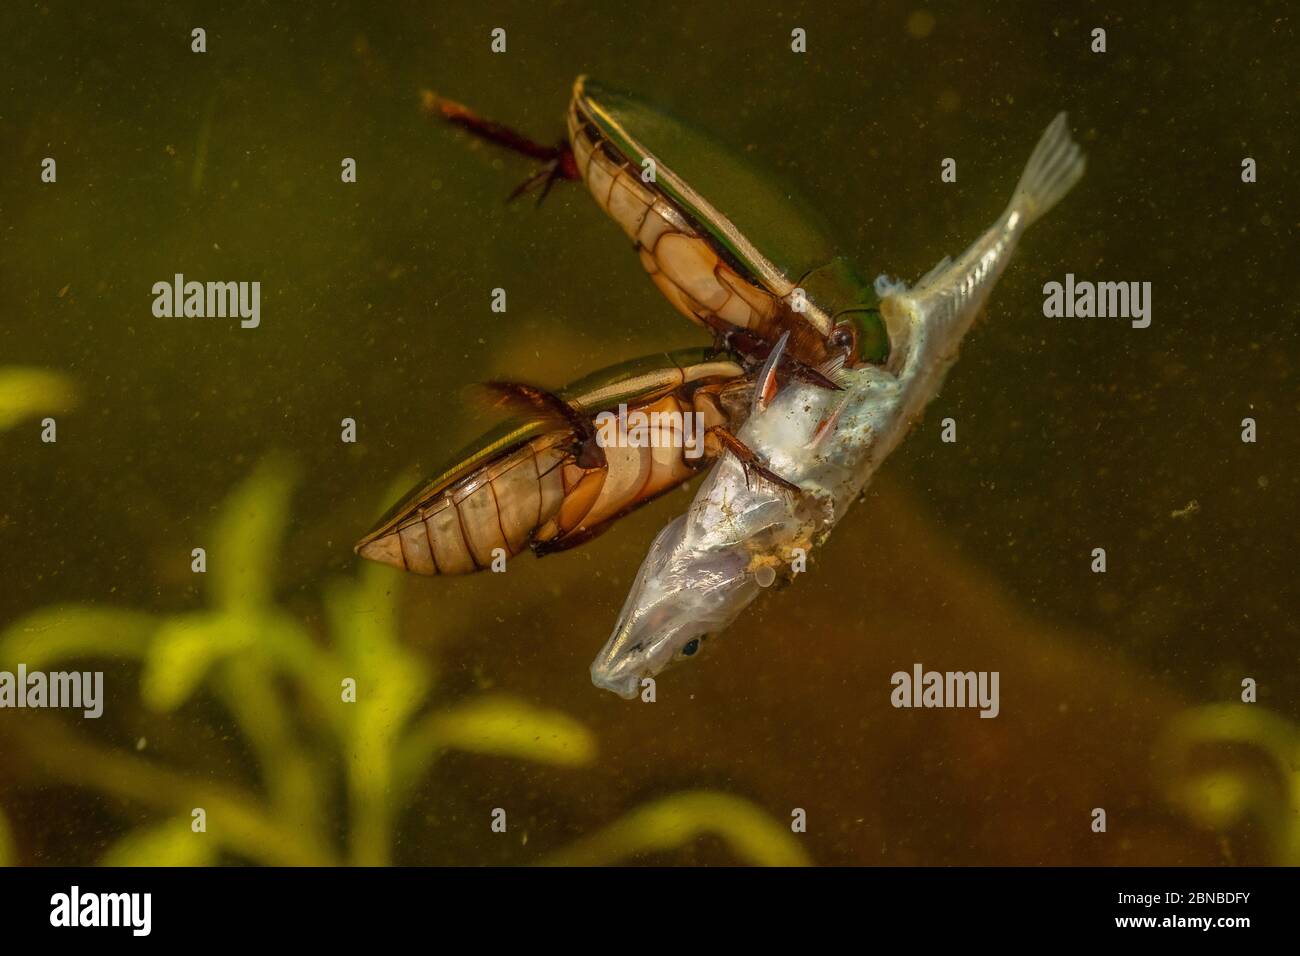 Diving Beetle (Cybister lateralimarginalis, Scaphinectes lateralimarginalis), two beetles feed on three-spined stickleback, Germany Stock Photo